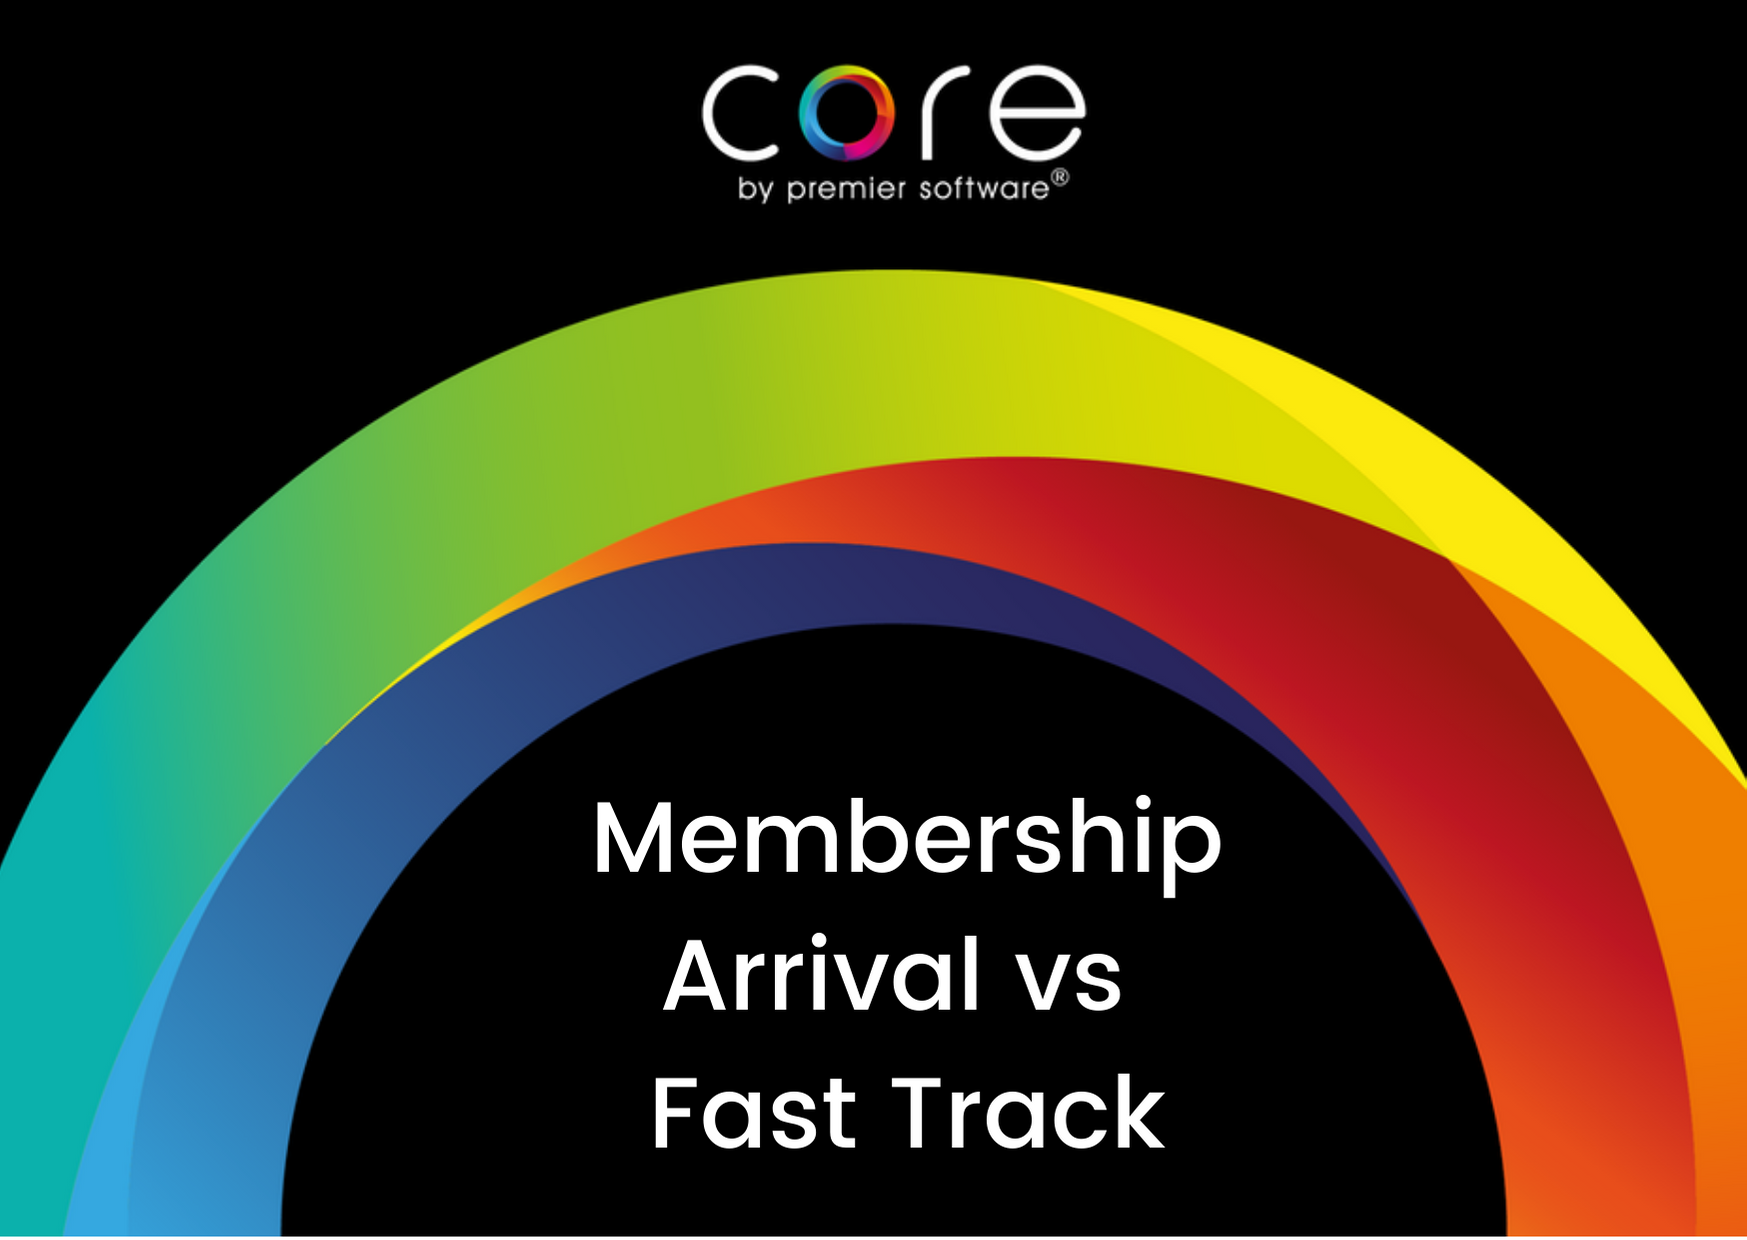 Did Your Know Core Membership Arrival vs Fast Track